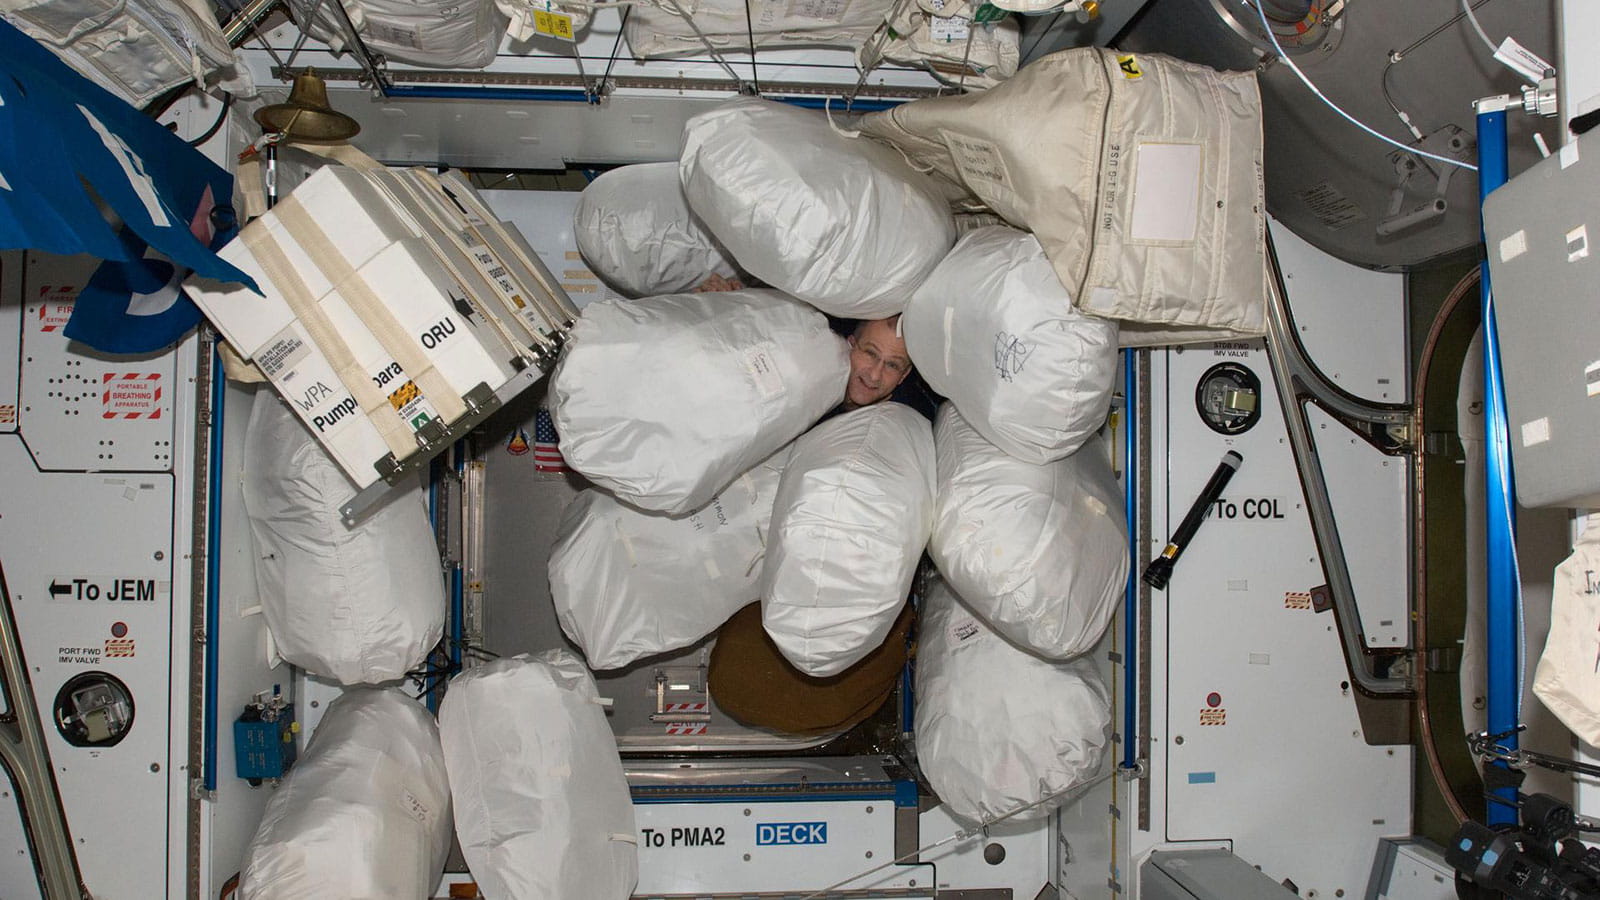 Trash bags floating around the International Space Station